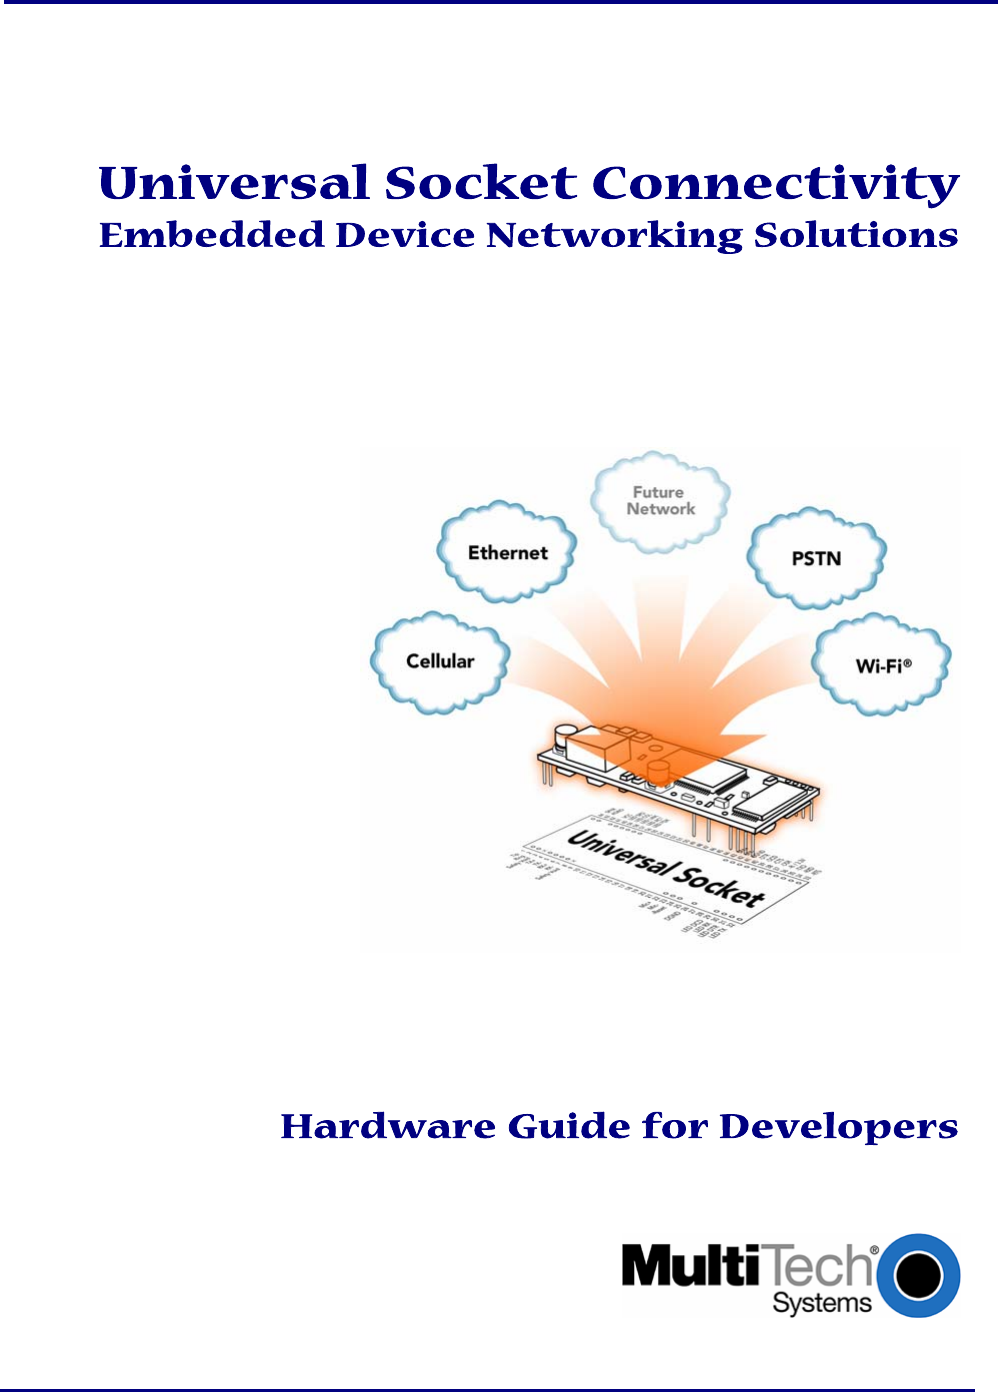          Universal Socket Connectivity Embedded Device Networking Solutions               Hardware Guide for Developers      